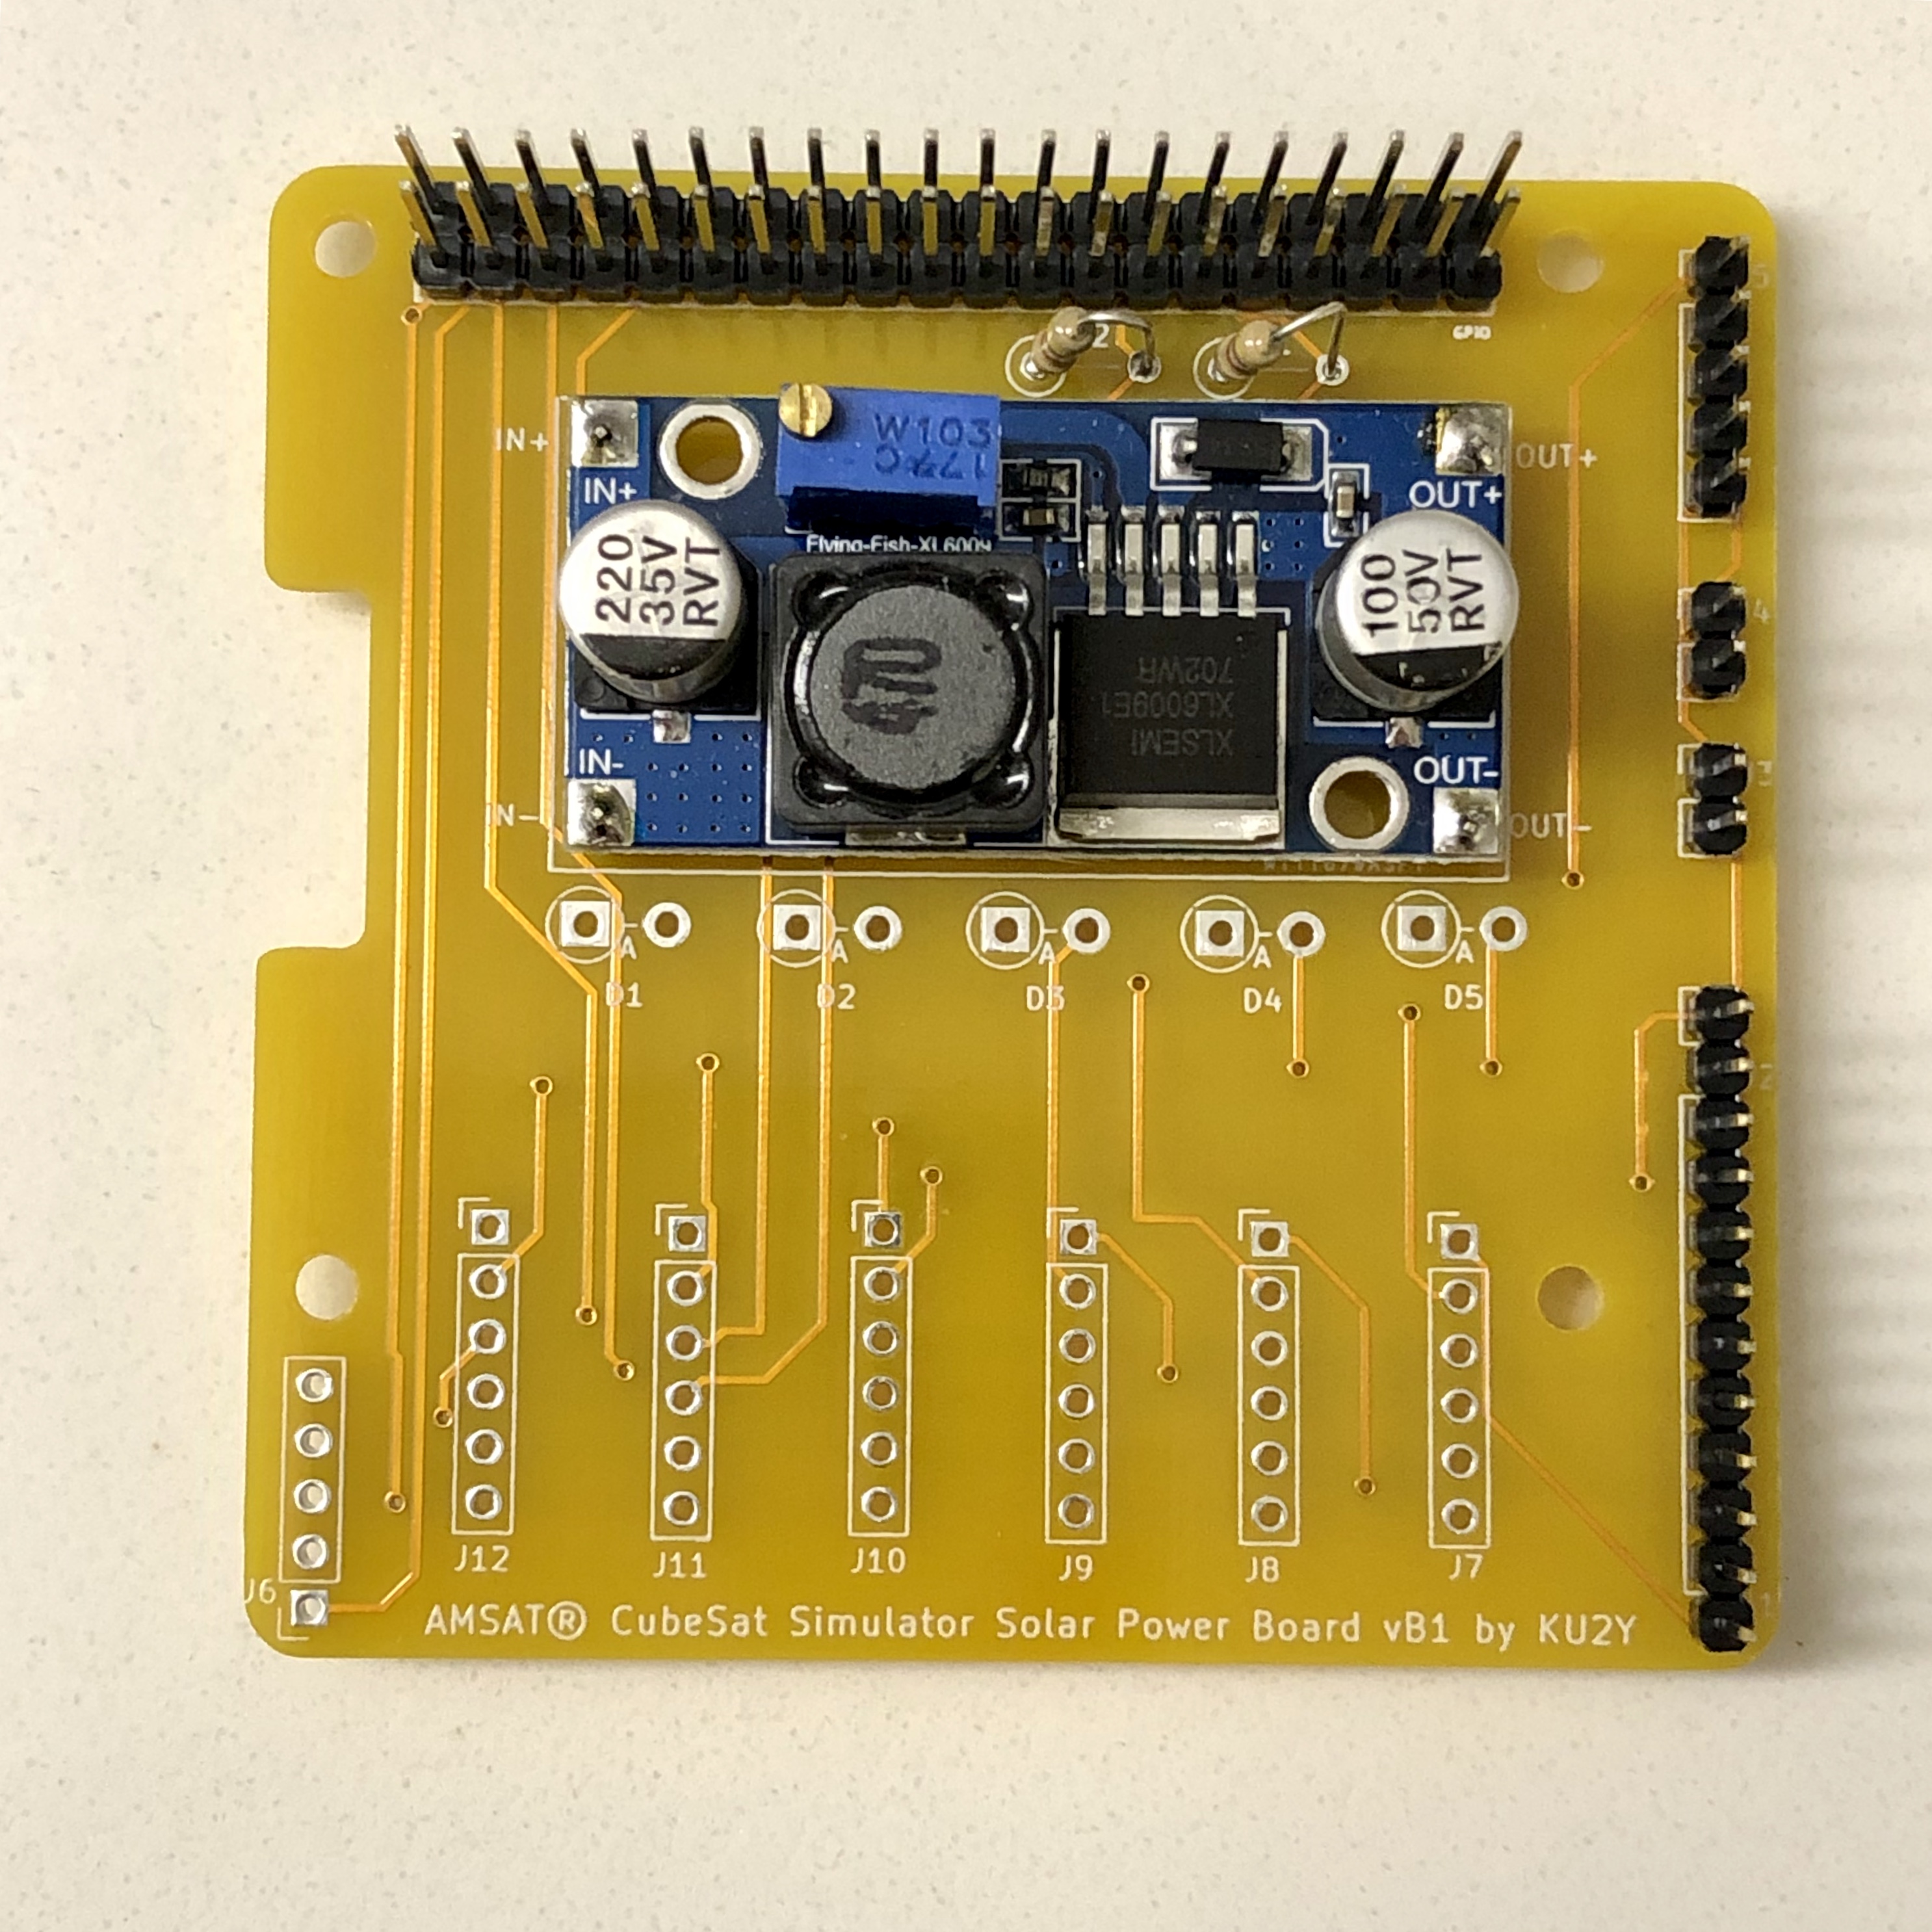 PCB with Boost Converter installed